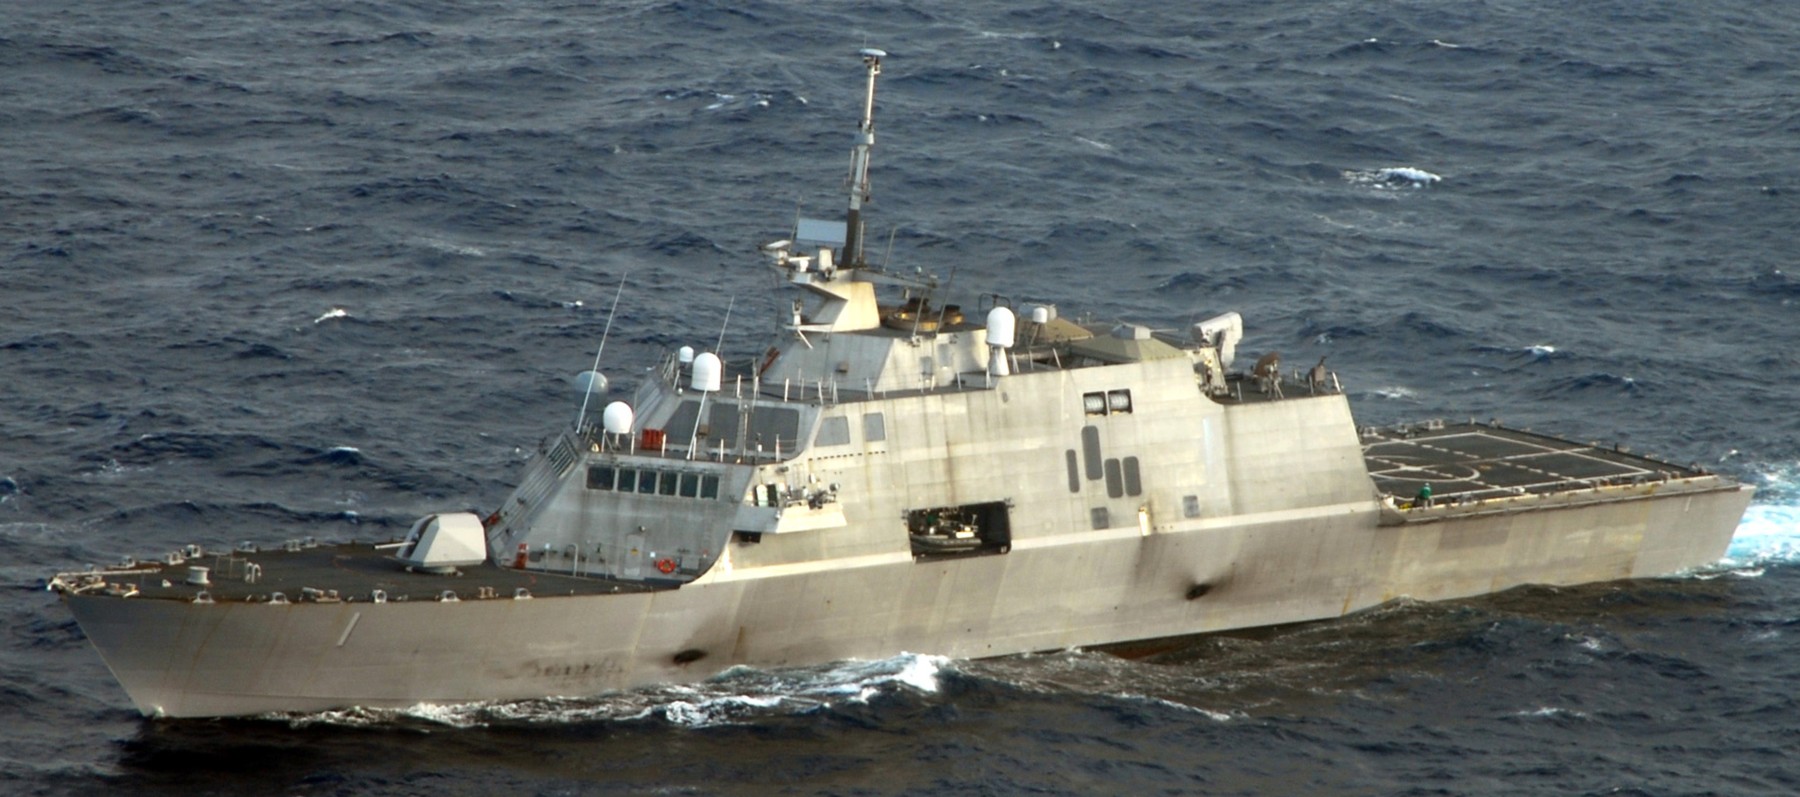 lcs-1 uss freedom class littoral combat ship us navy 98